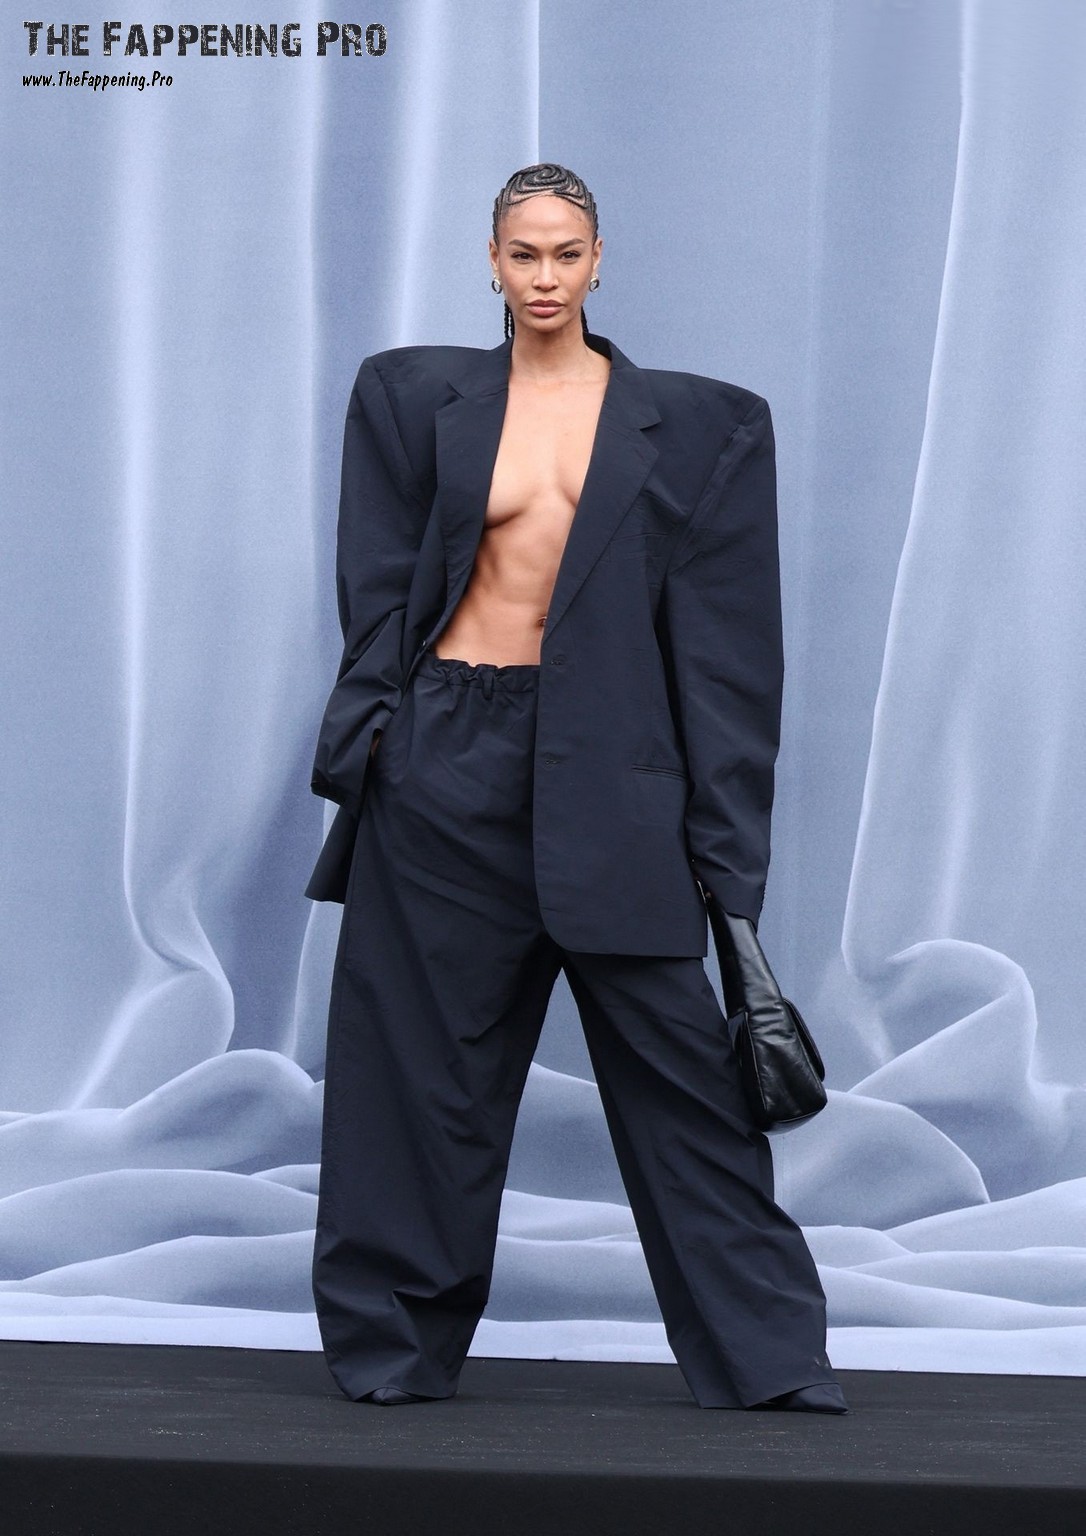 Experience the jaw-dropping moment at the Balenciaga Fashion Show for Paris Fashion Week 2024, where the stunning 35-year-old model Joan Smalls caused a sensation by baring it all on stage! Unlike the usual wardrobe malfunctions, Joan confidently flaunted her small breasts in an oversized jacket without any lingerie, leaving everyone in awe. Don't miss the chance to see the sizzling new photos of Joan Smalls in her daring and bold nude pose!